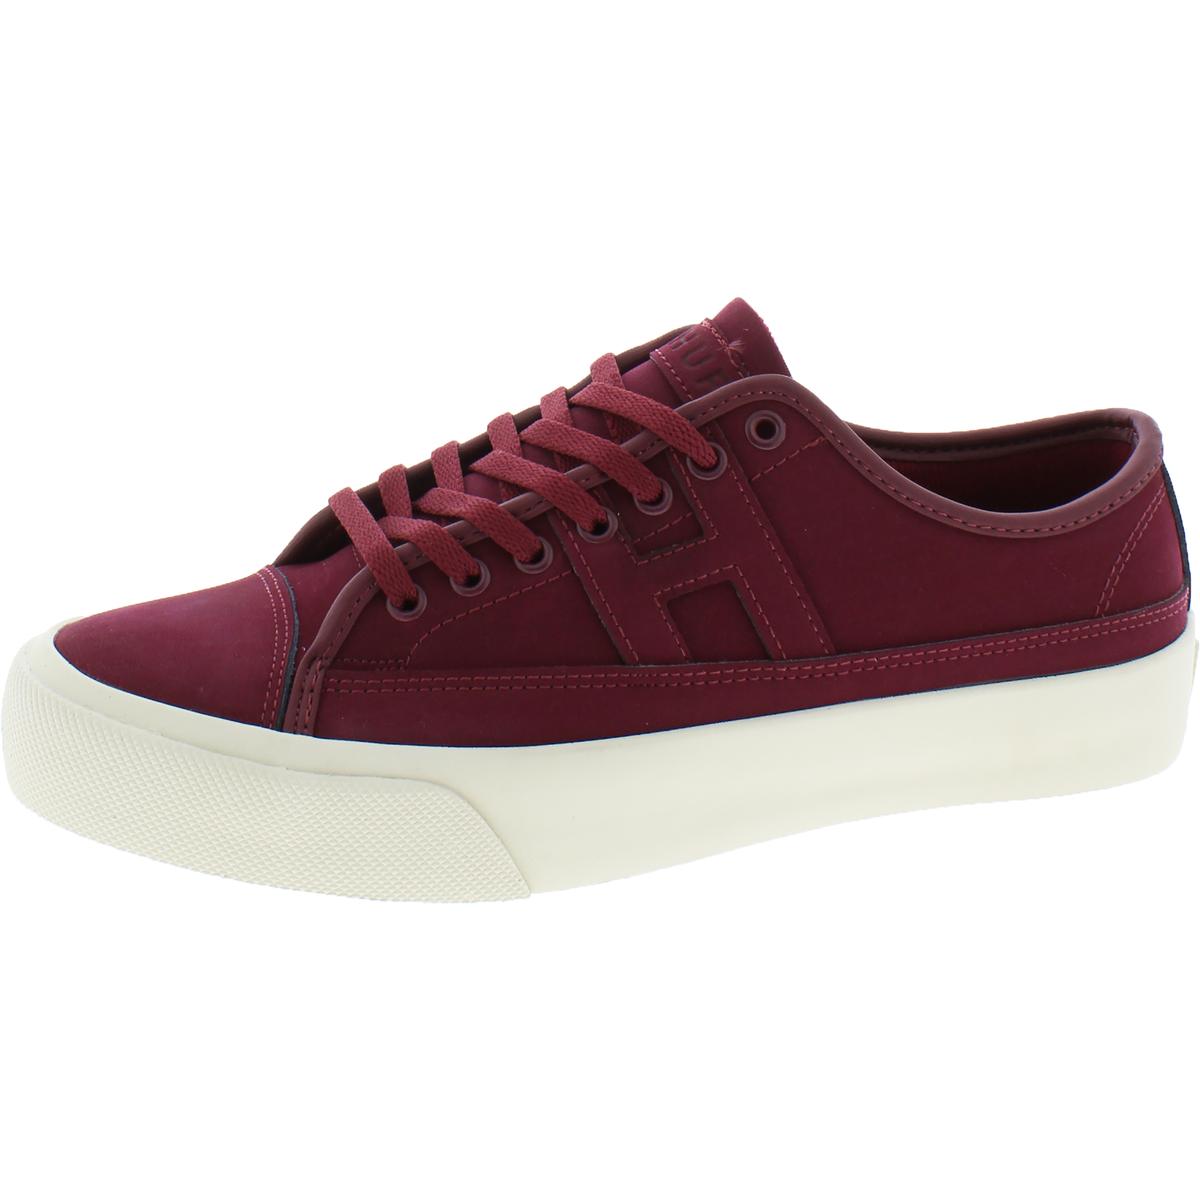 HUF Mens Hupper 2 Lo Suede Low-Top Skateboarding Shoes Athletic BHFO ...